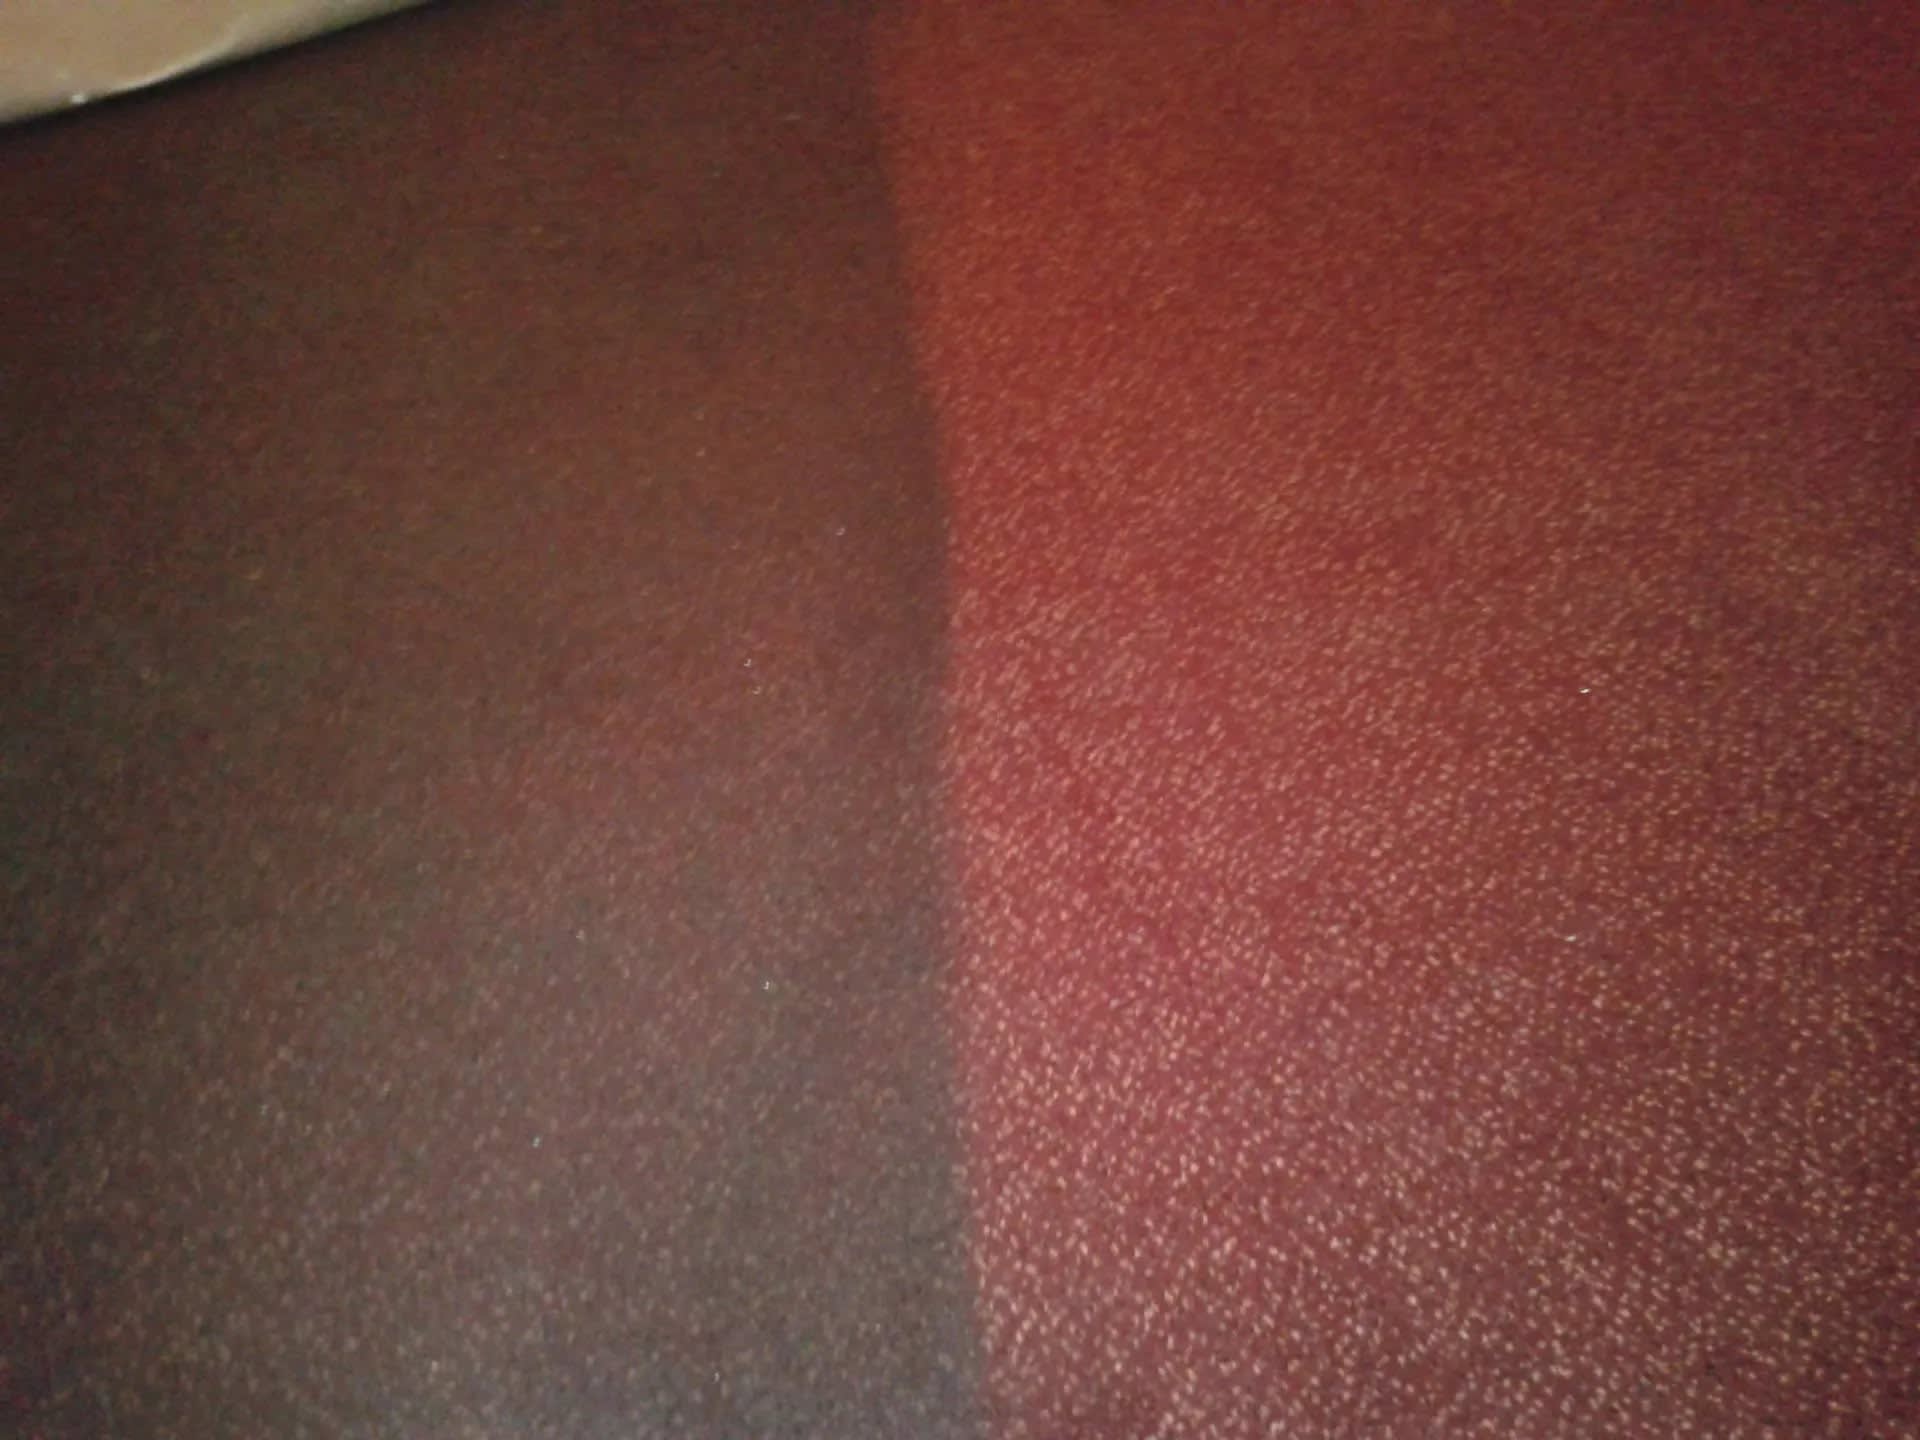 Images Extracta Carpet & Upholstery Cleaning.